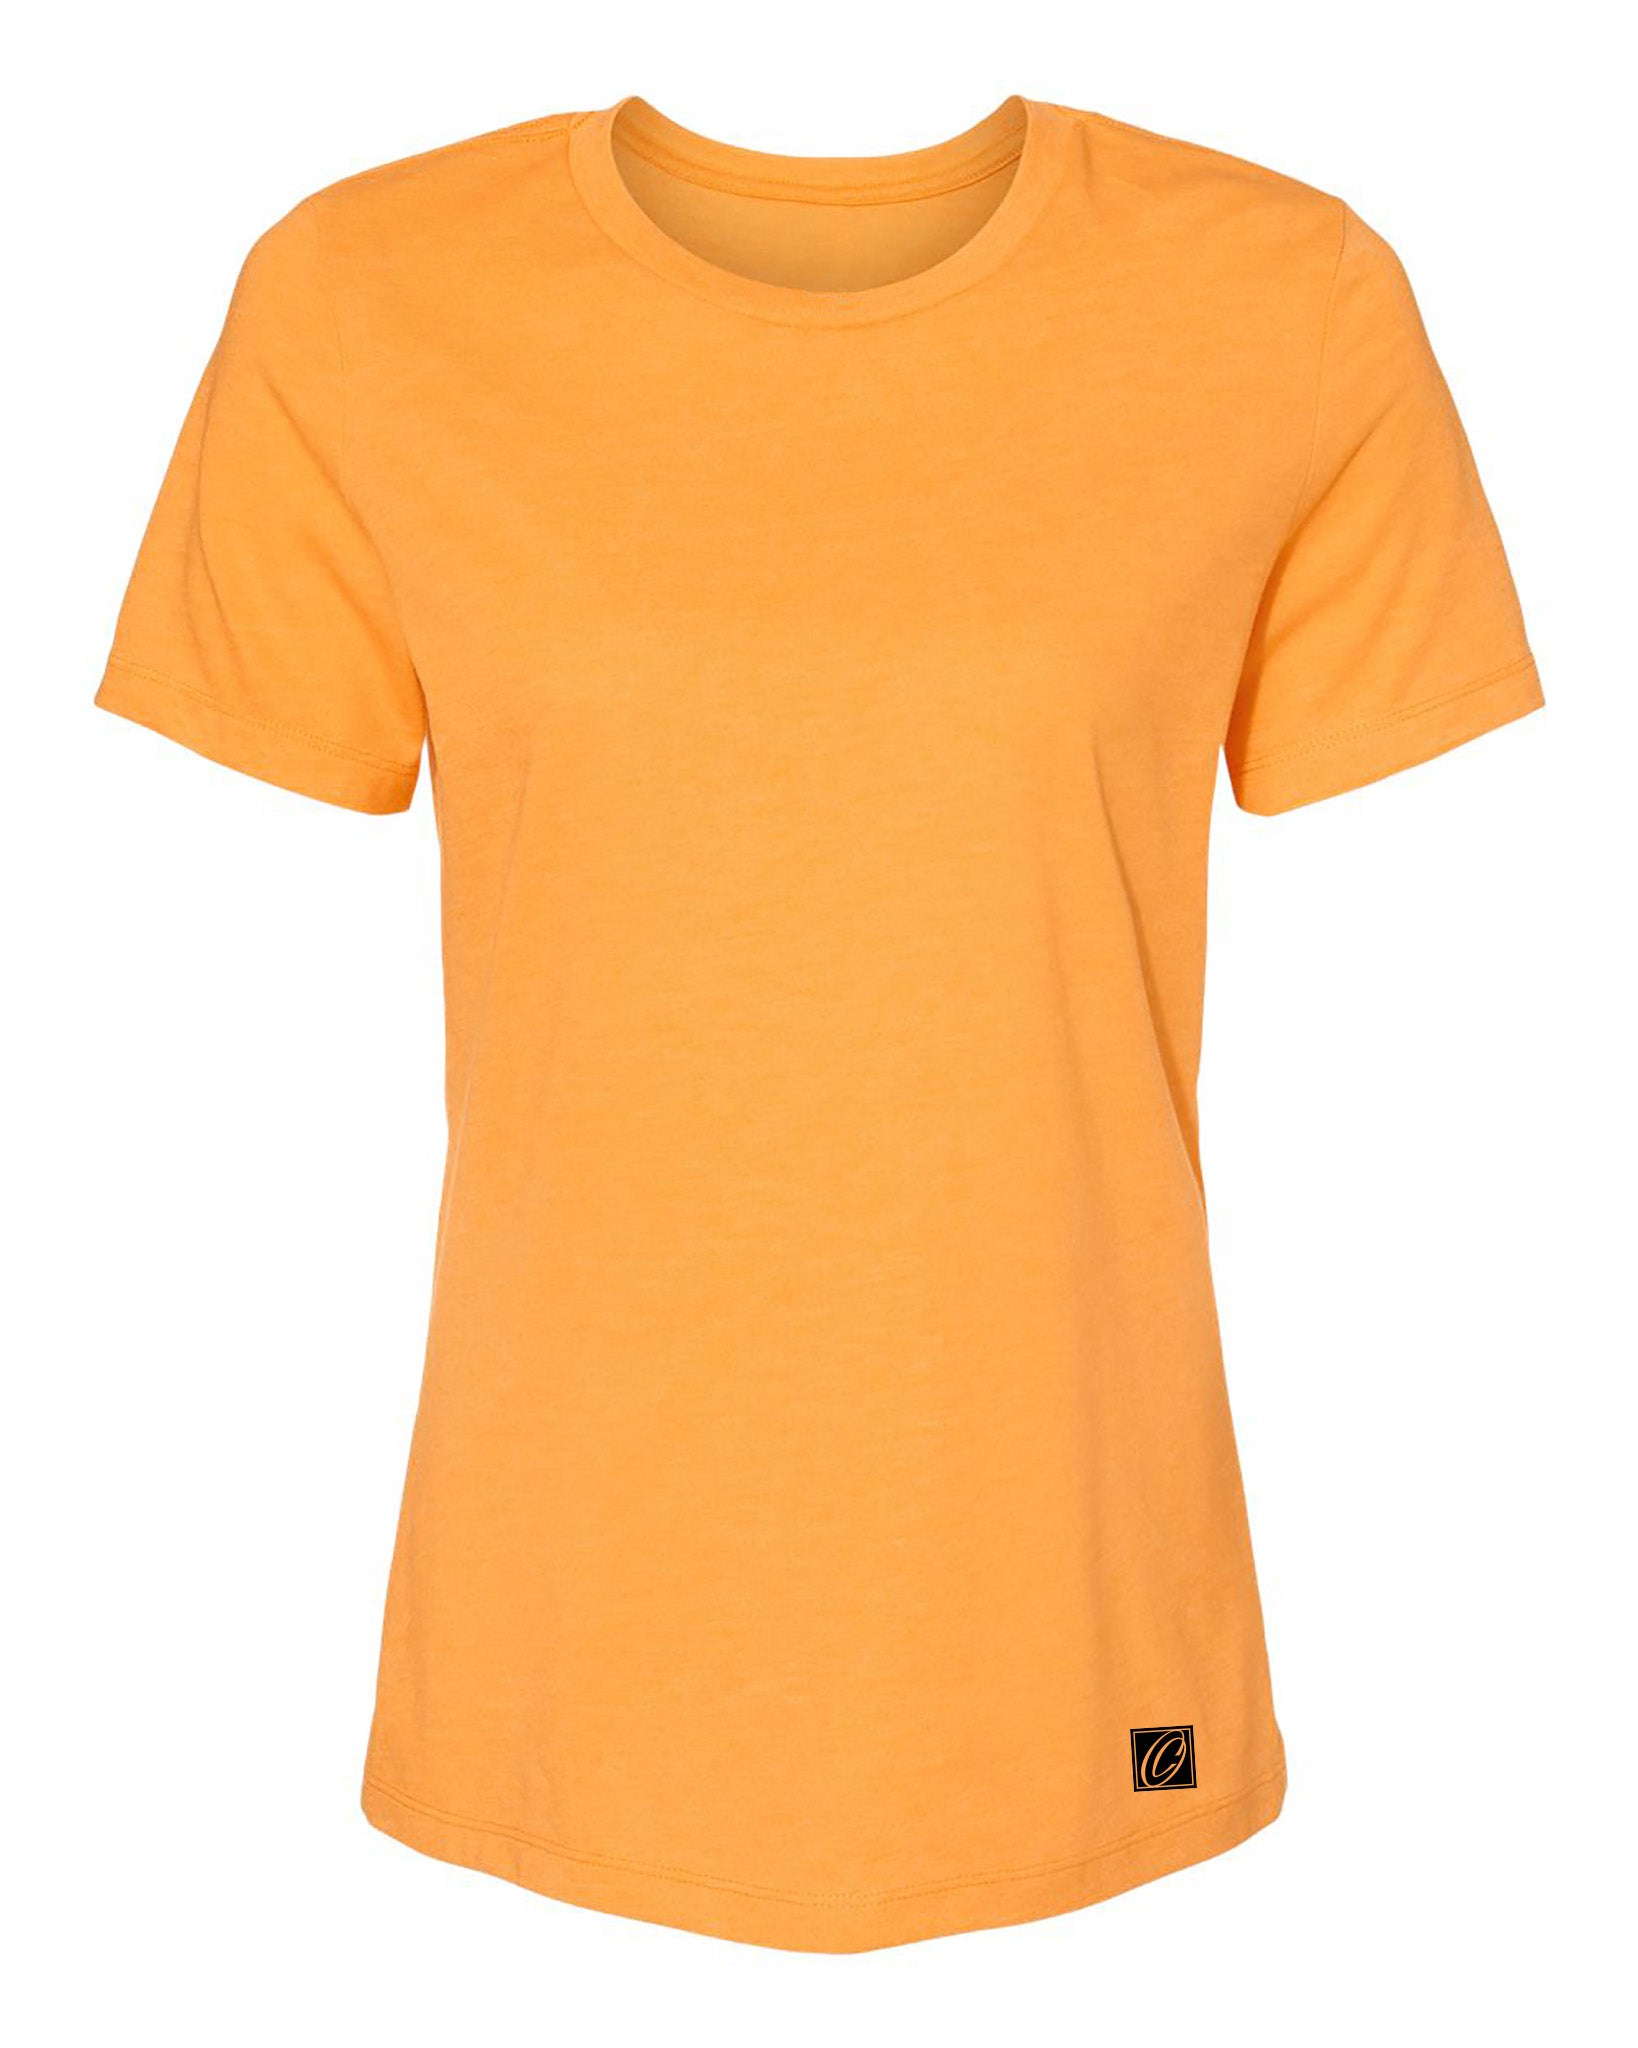 Bella Canvas Ladies Relaxed Fit Heather CVC Crew Neck Short Sleeve Tee - Red/Pink/Yellow/Orange/Tan